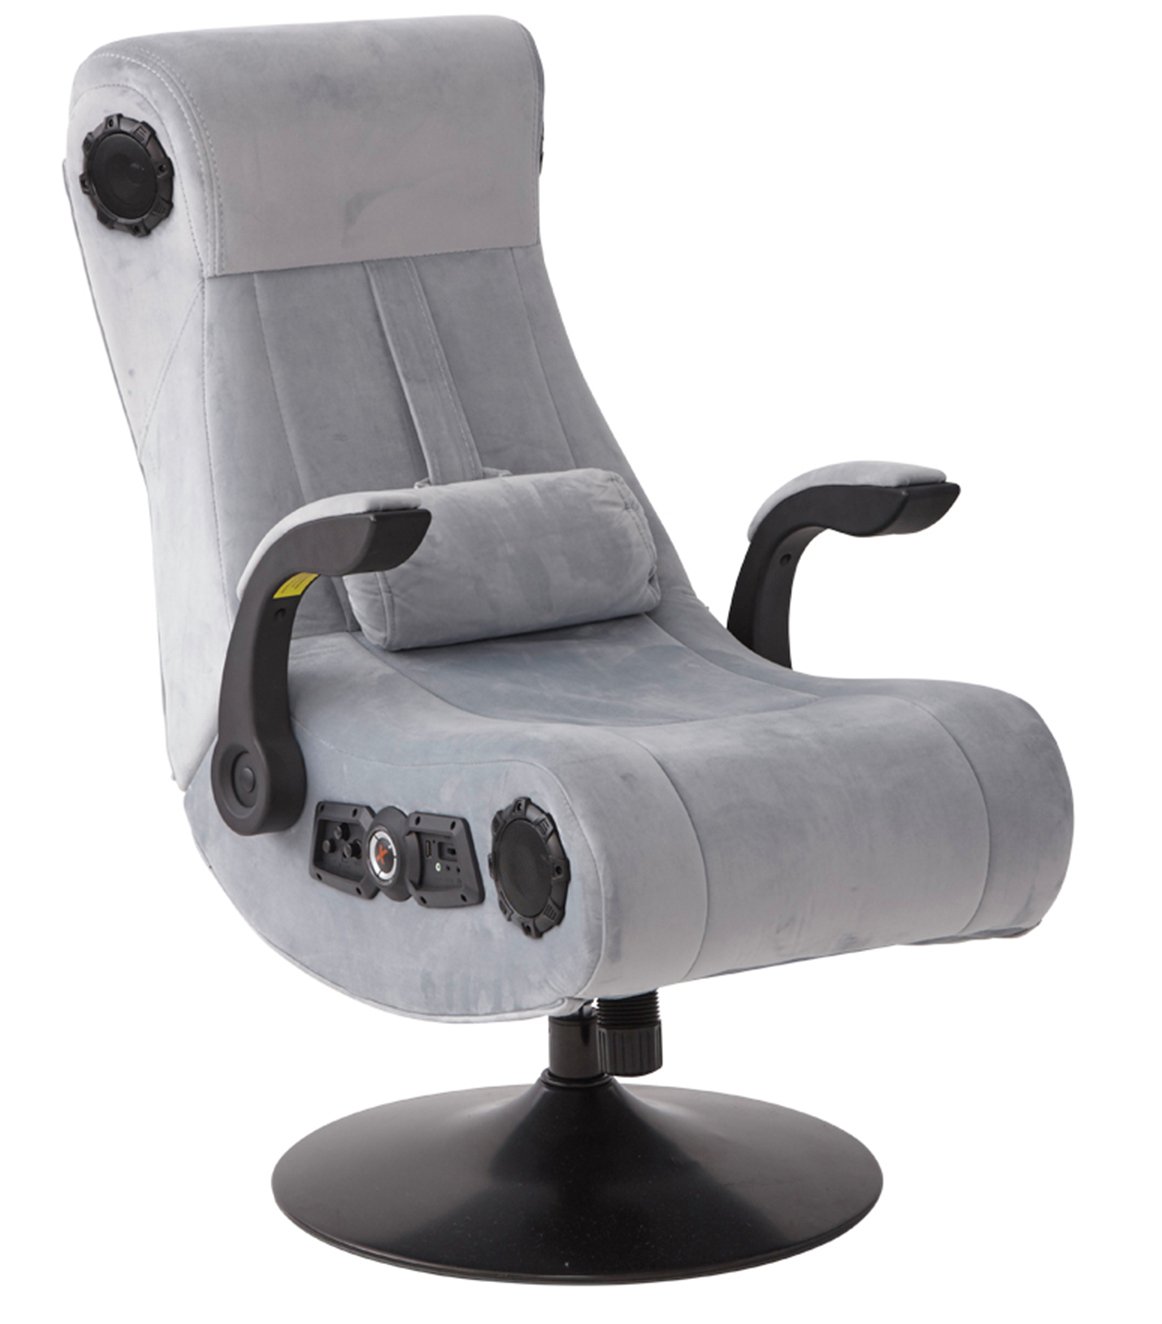 X-Rocker Deluxe Chenille Pedestal Gaming Chair - Silver